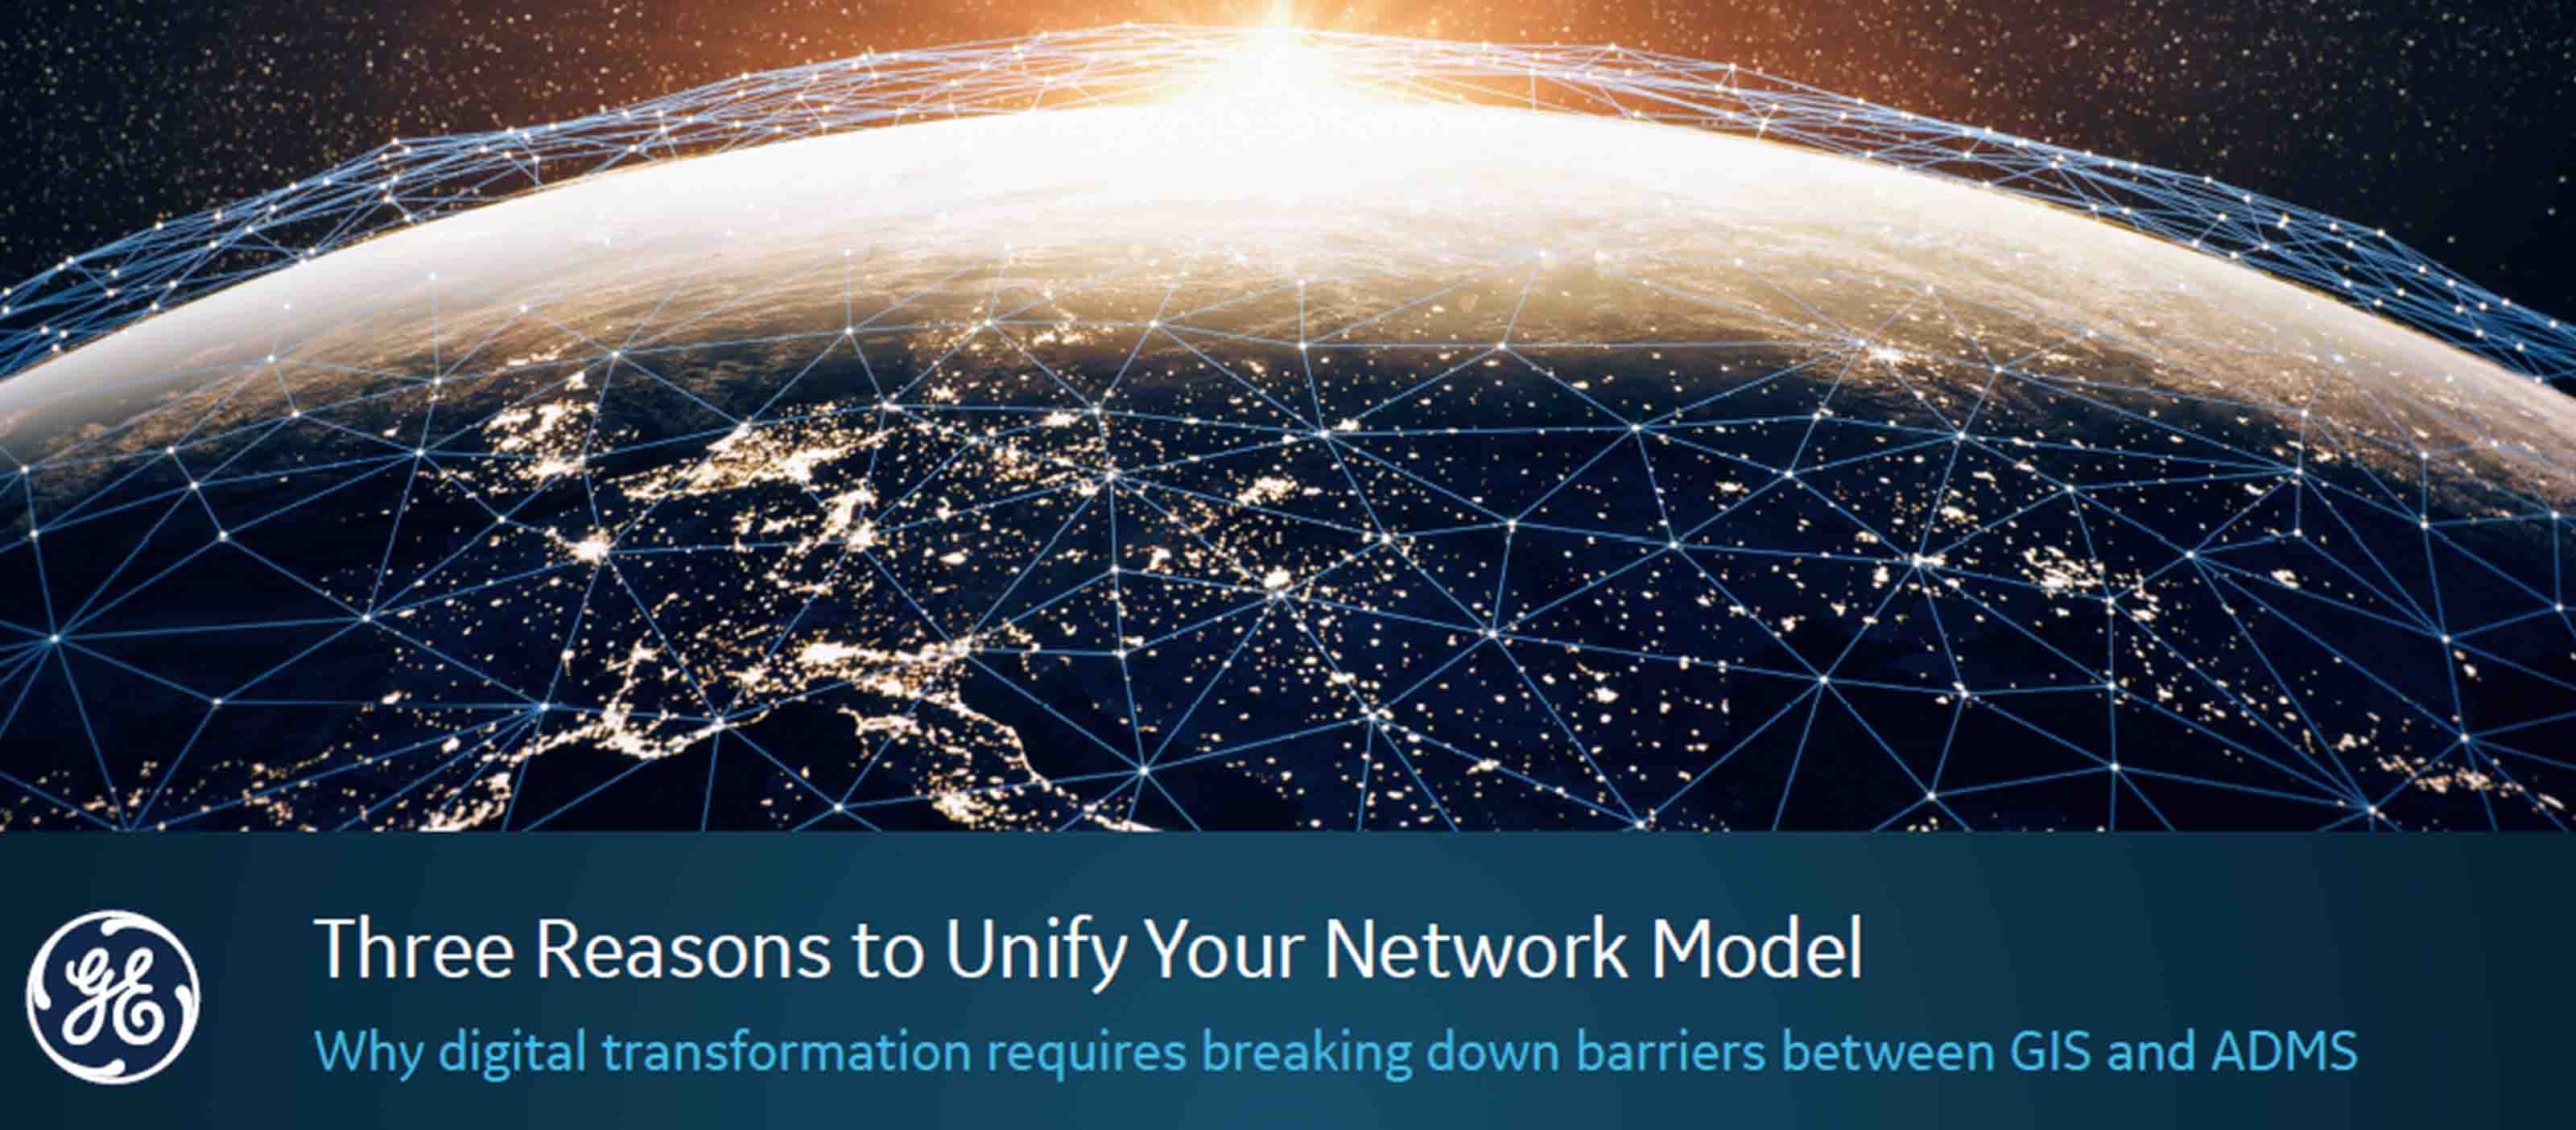 Three reasons to unify your network model | GE Digital white paper